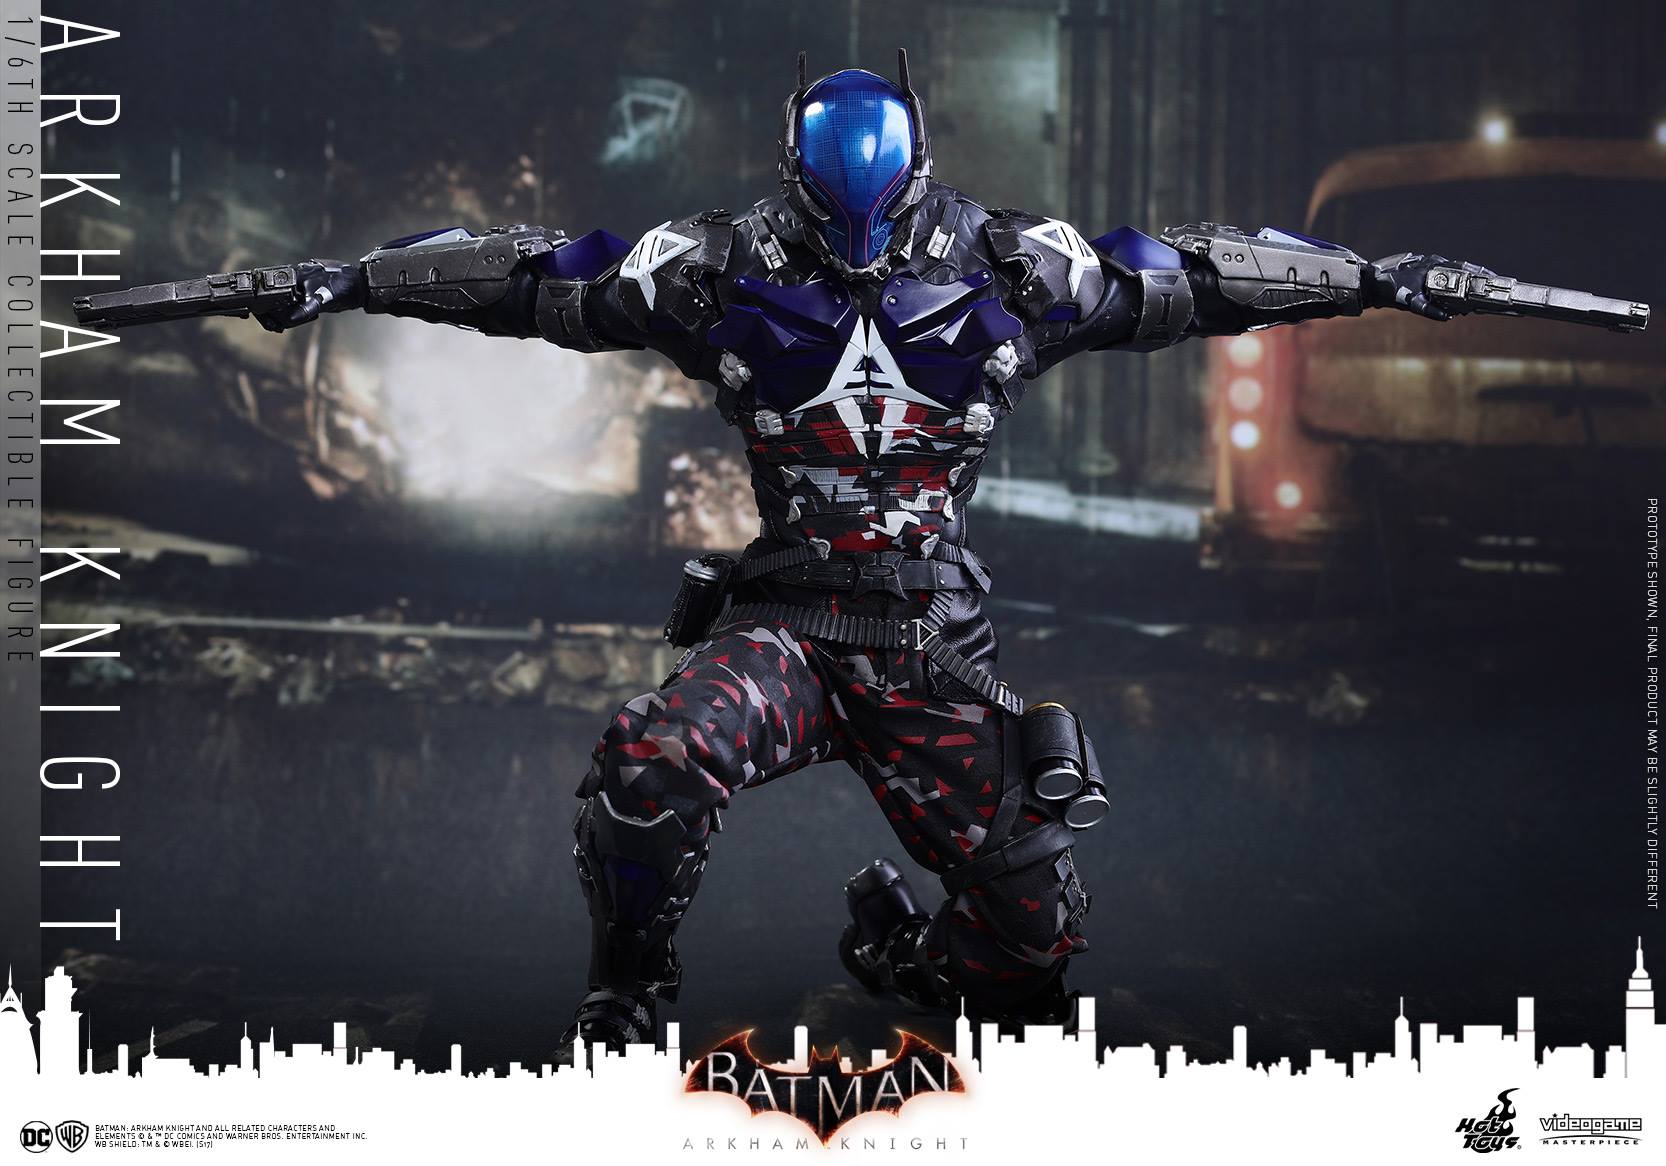 Batman Arkham Knight Sixth Scale Figure by Hot Toys | ActionFiguresDaily.com